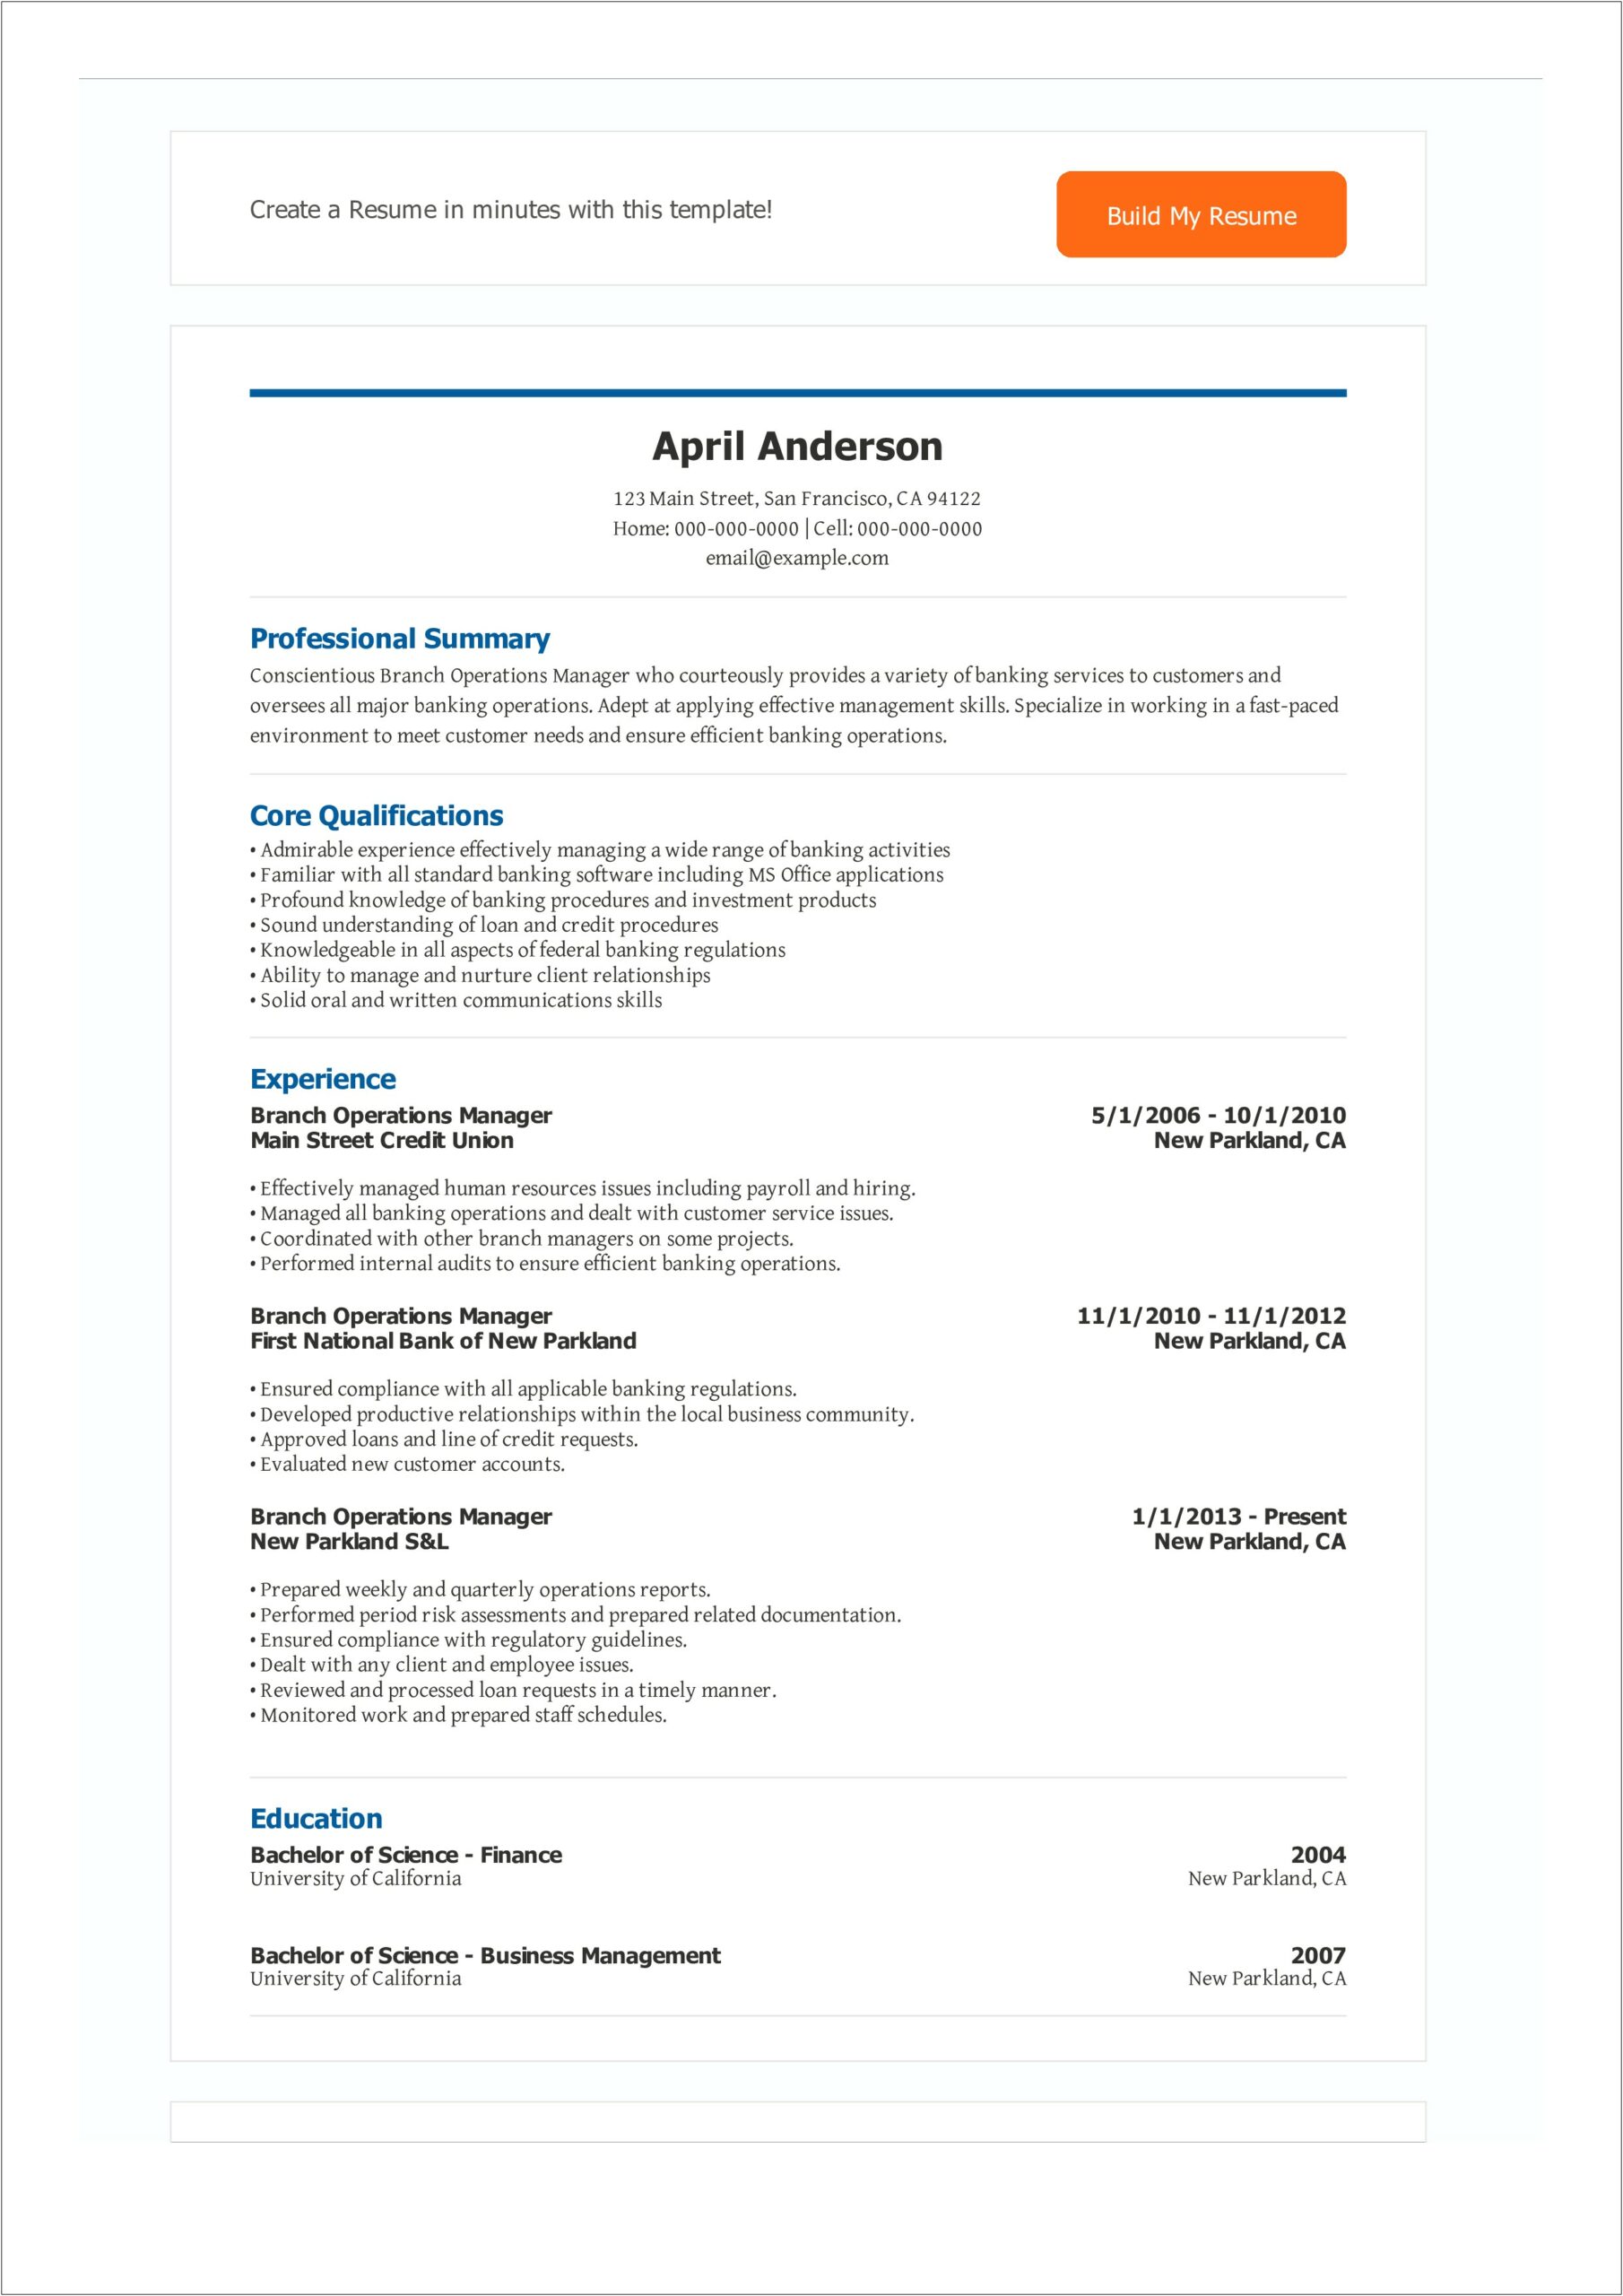 Operations Manager Description For Resume